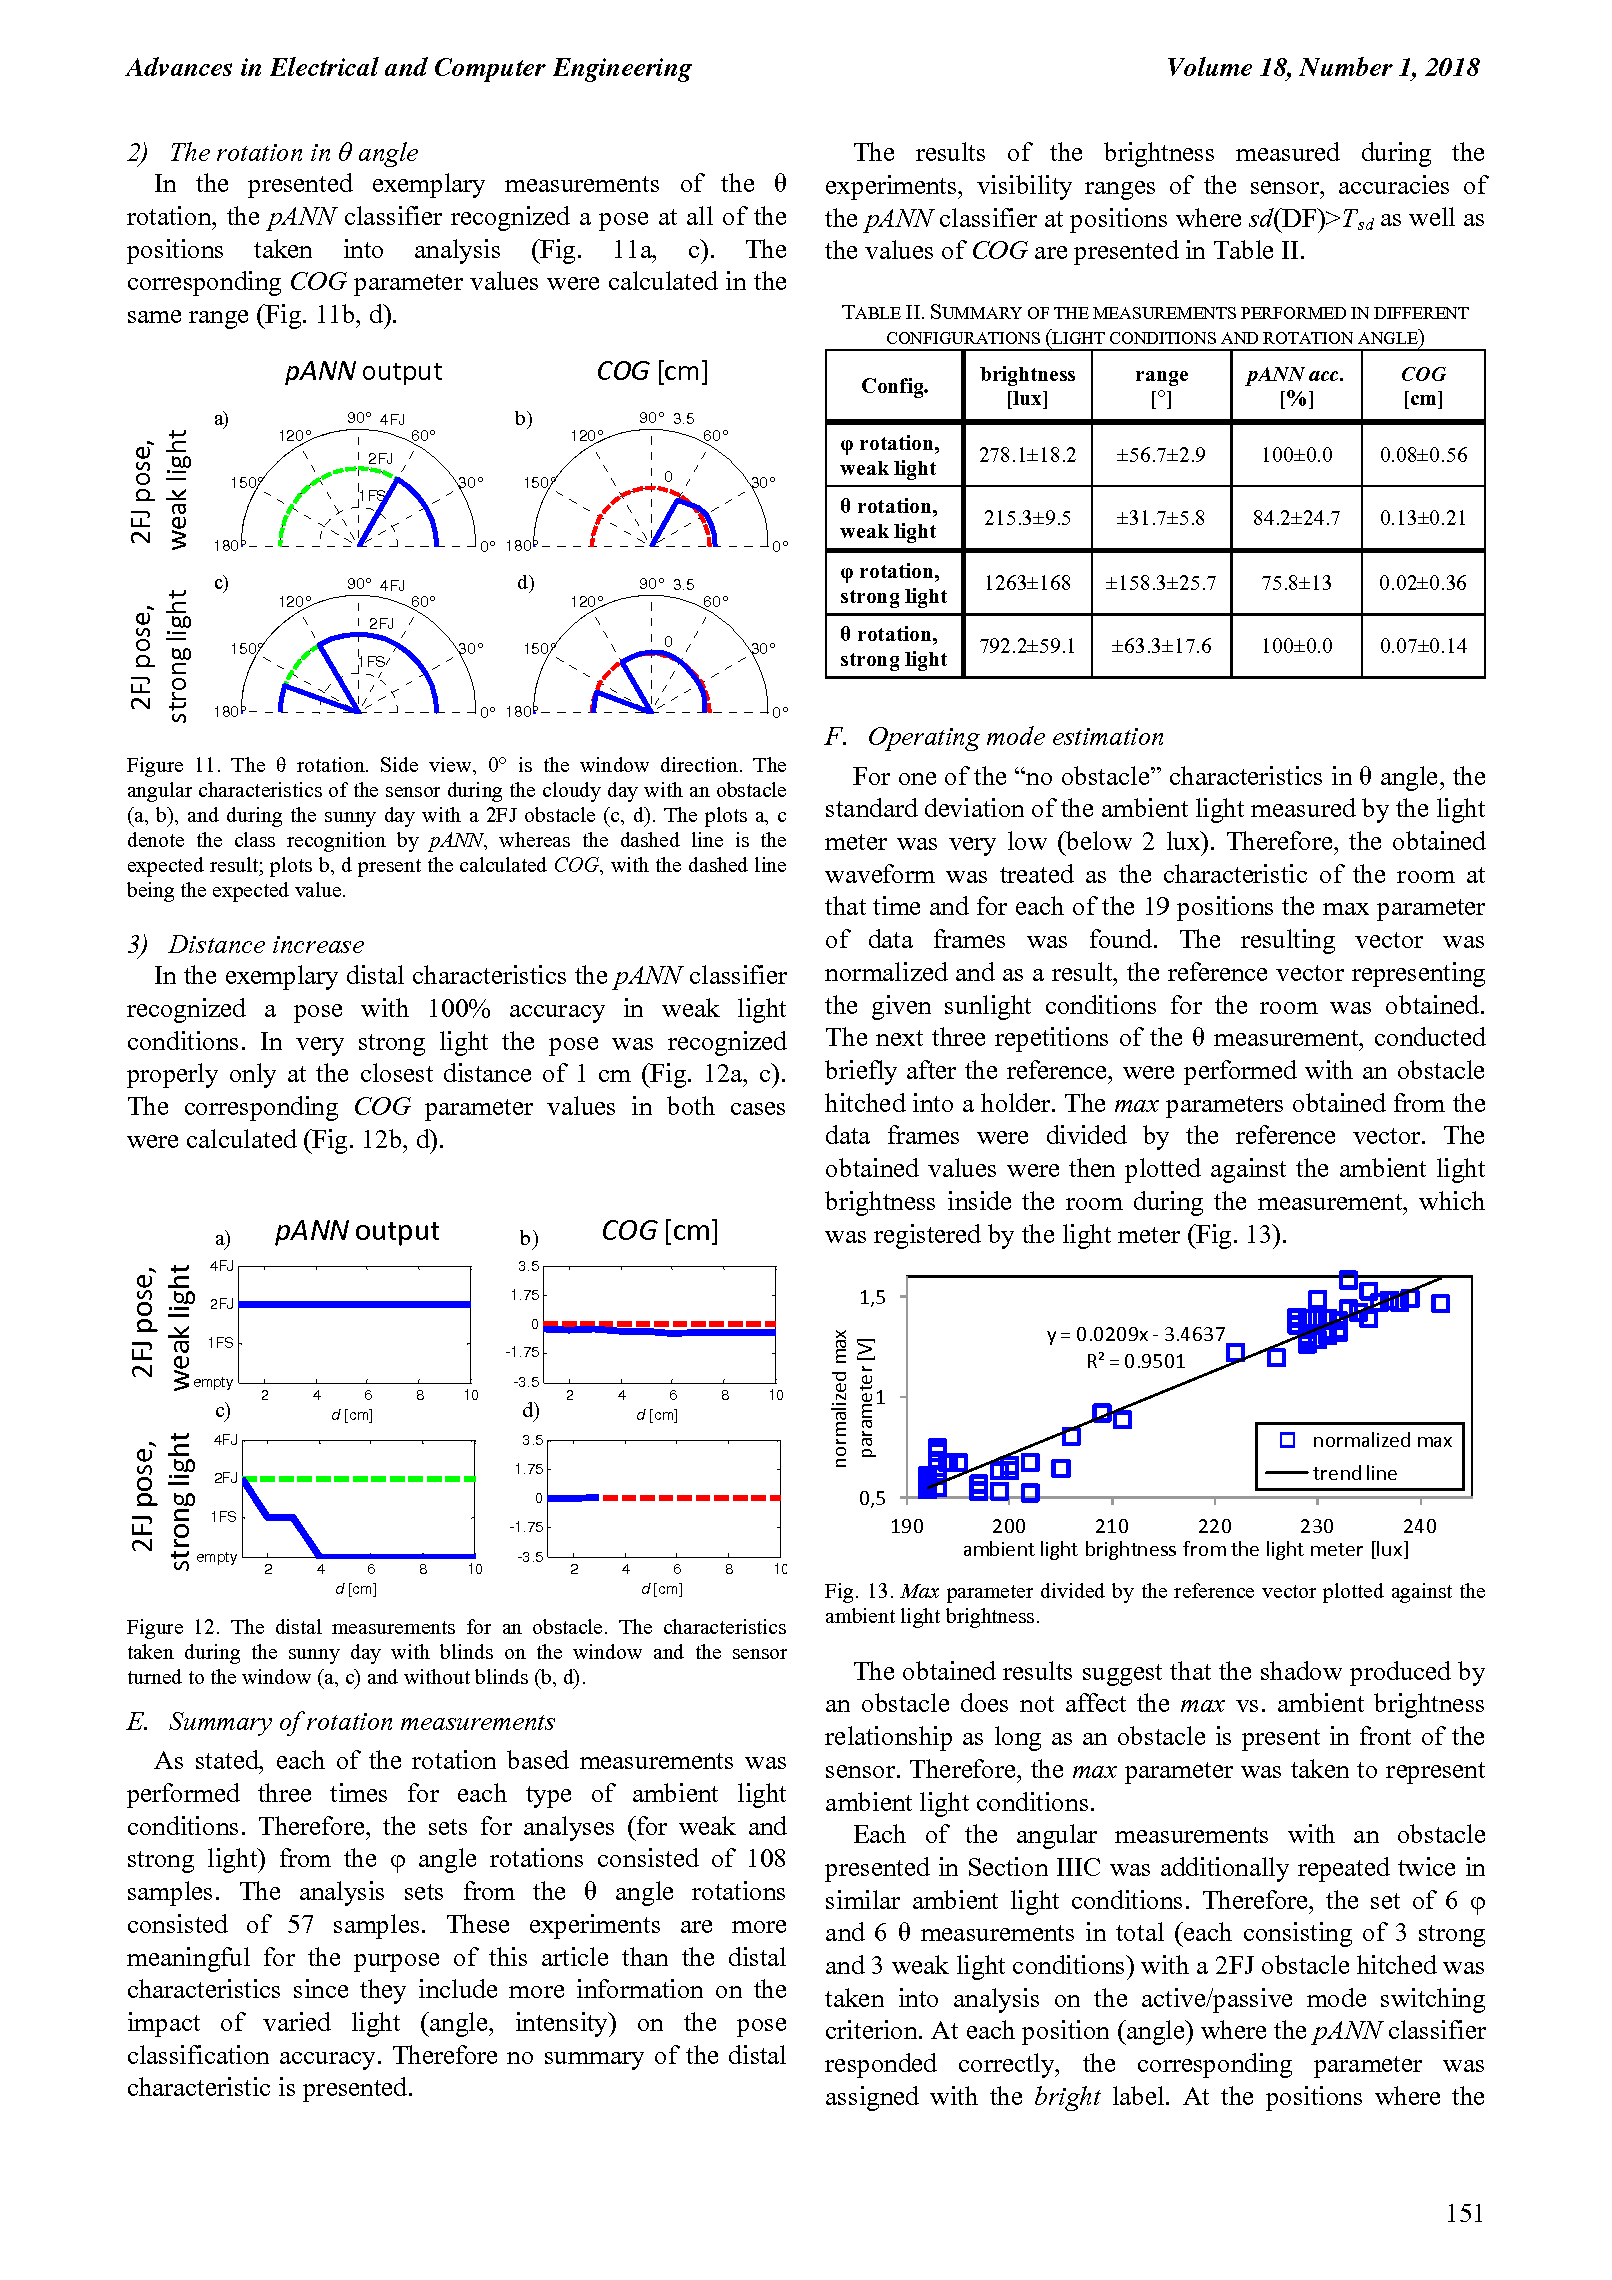 PDF Quickview for paper with DOI:10.4316/AECE.2018.01018